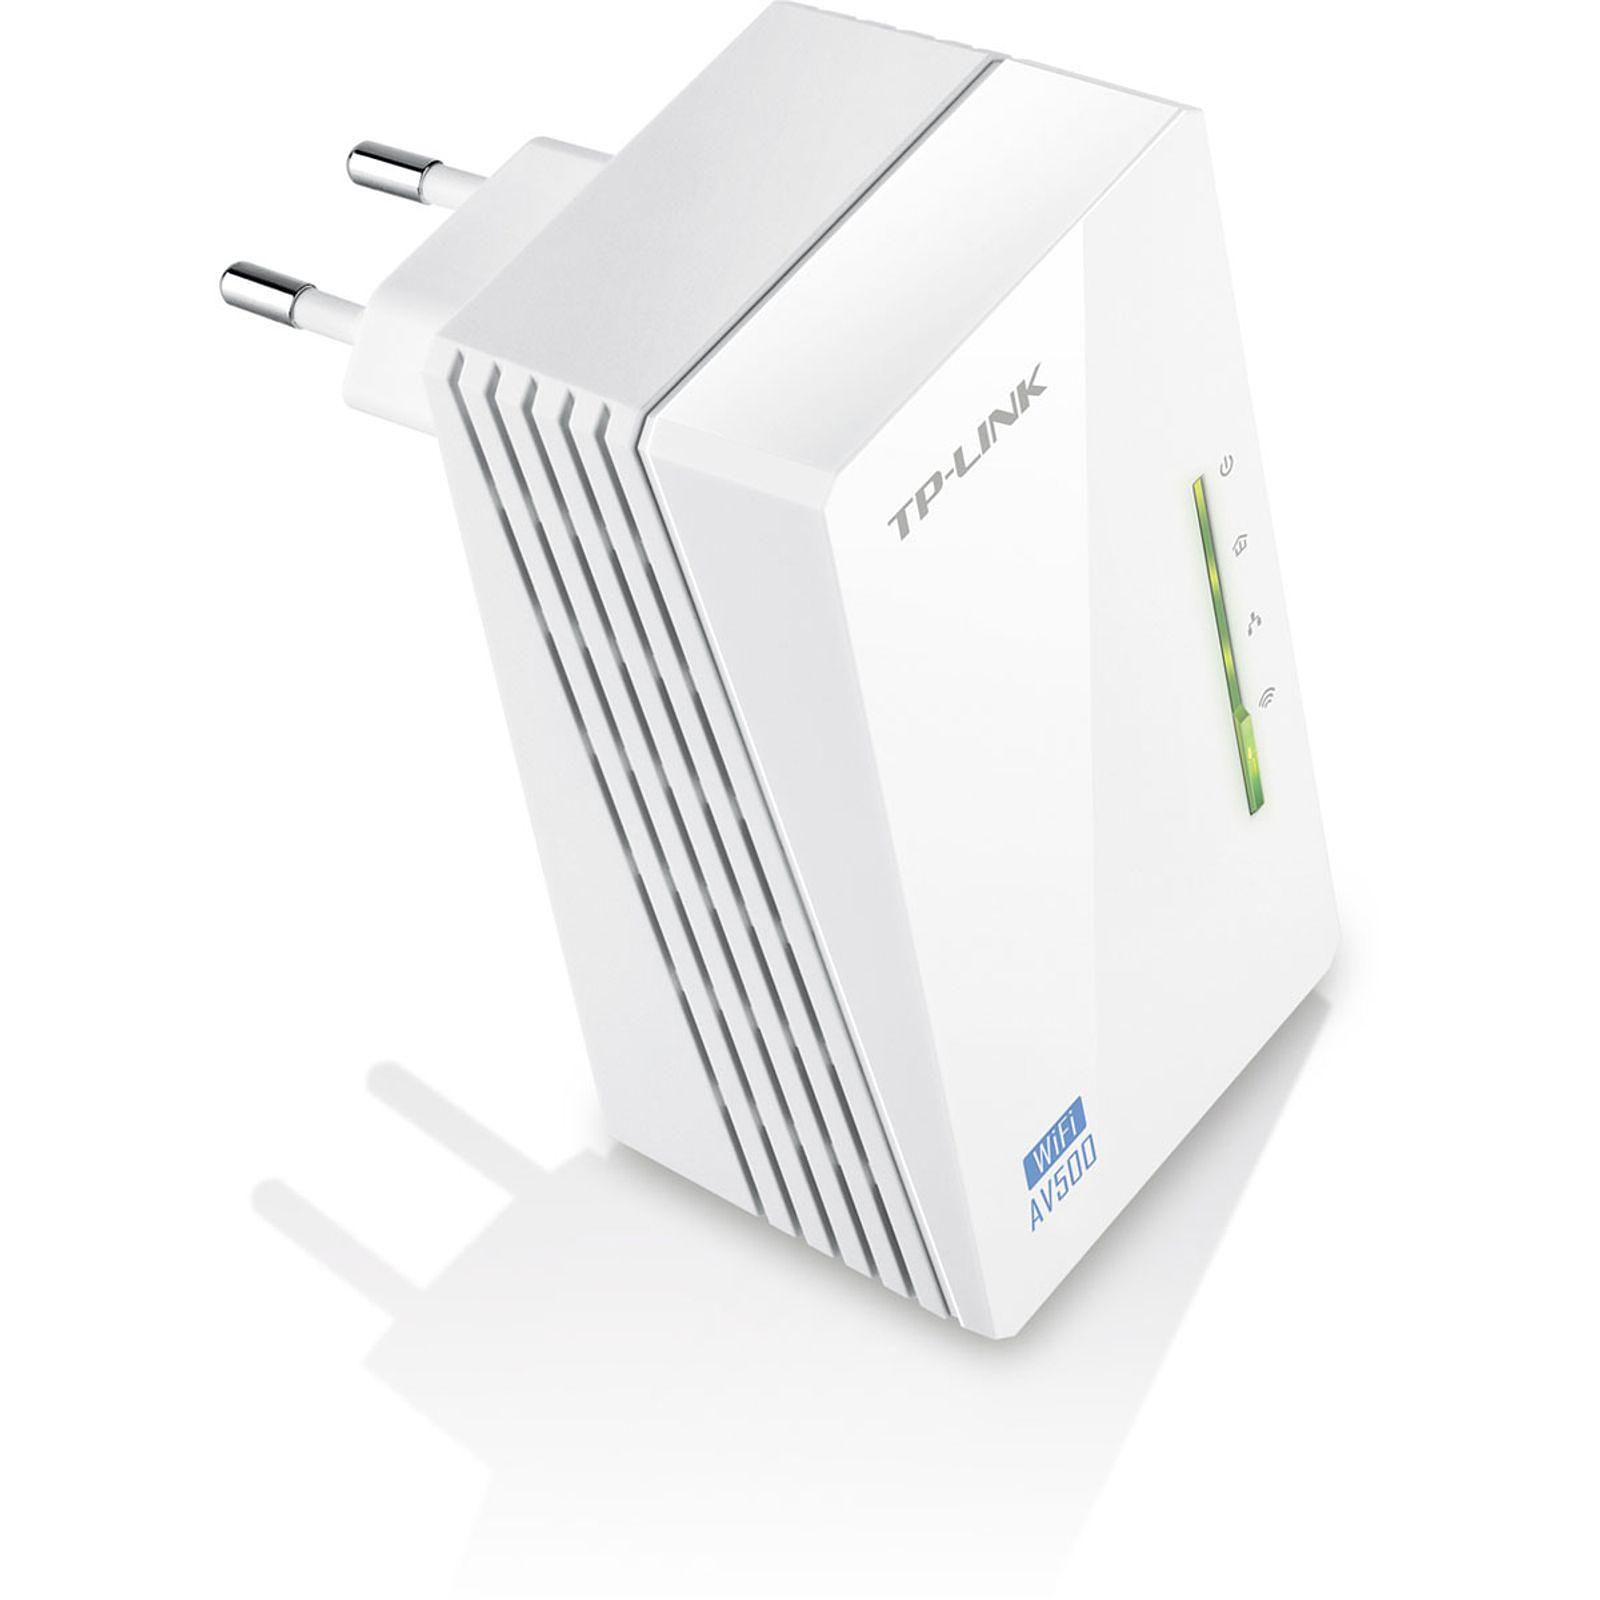 TP-Link TL-WPA4220 WiFi Extender CPL 500Mbps/WiFi 300Mbps - Adaptateur CPL - 4